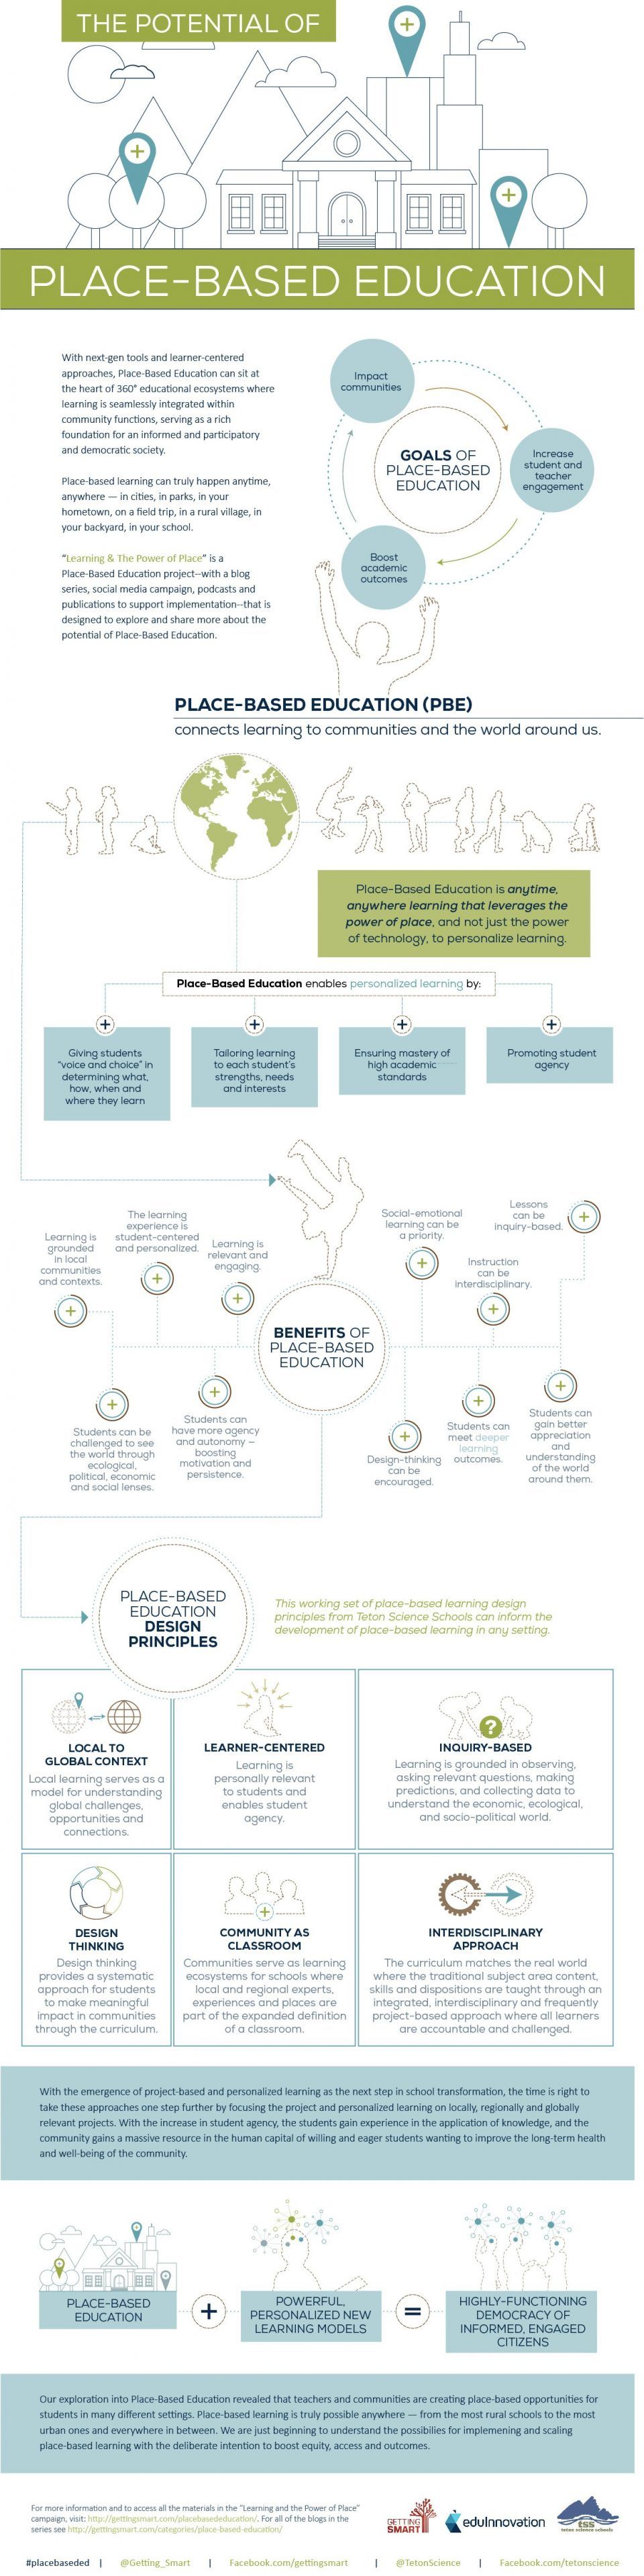 The Potential of Place-Based Education Infographic